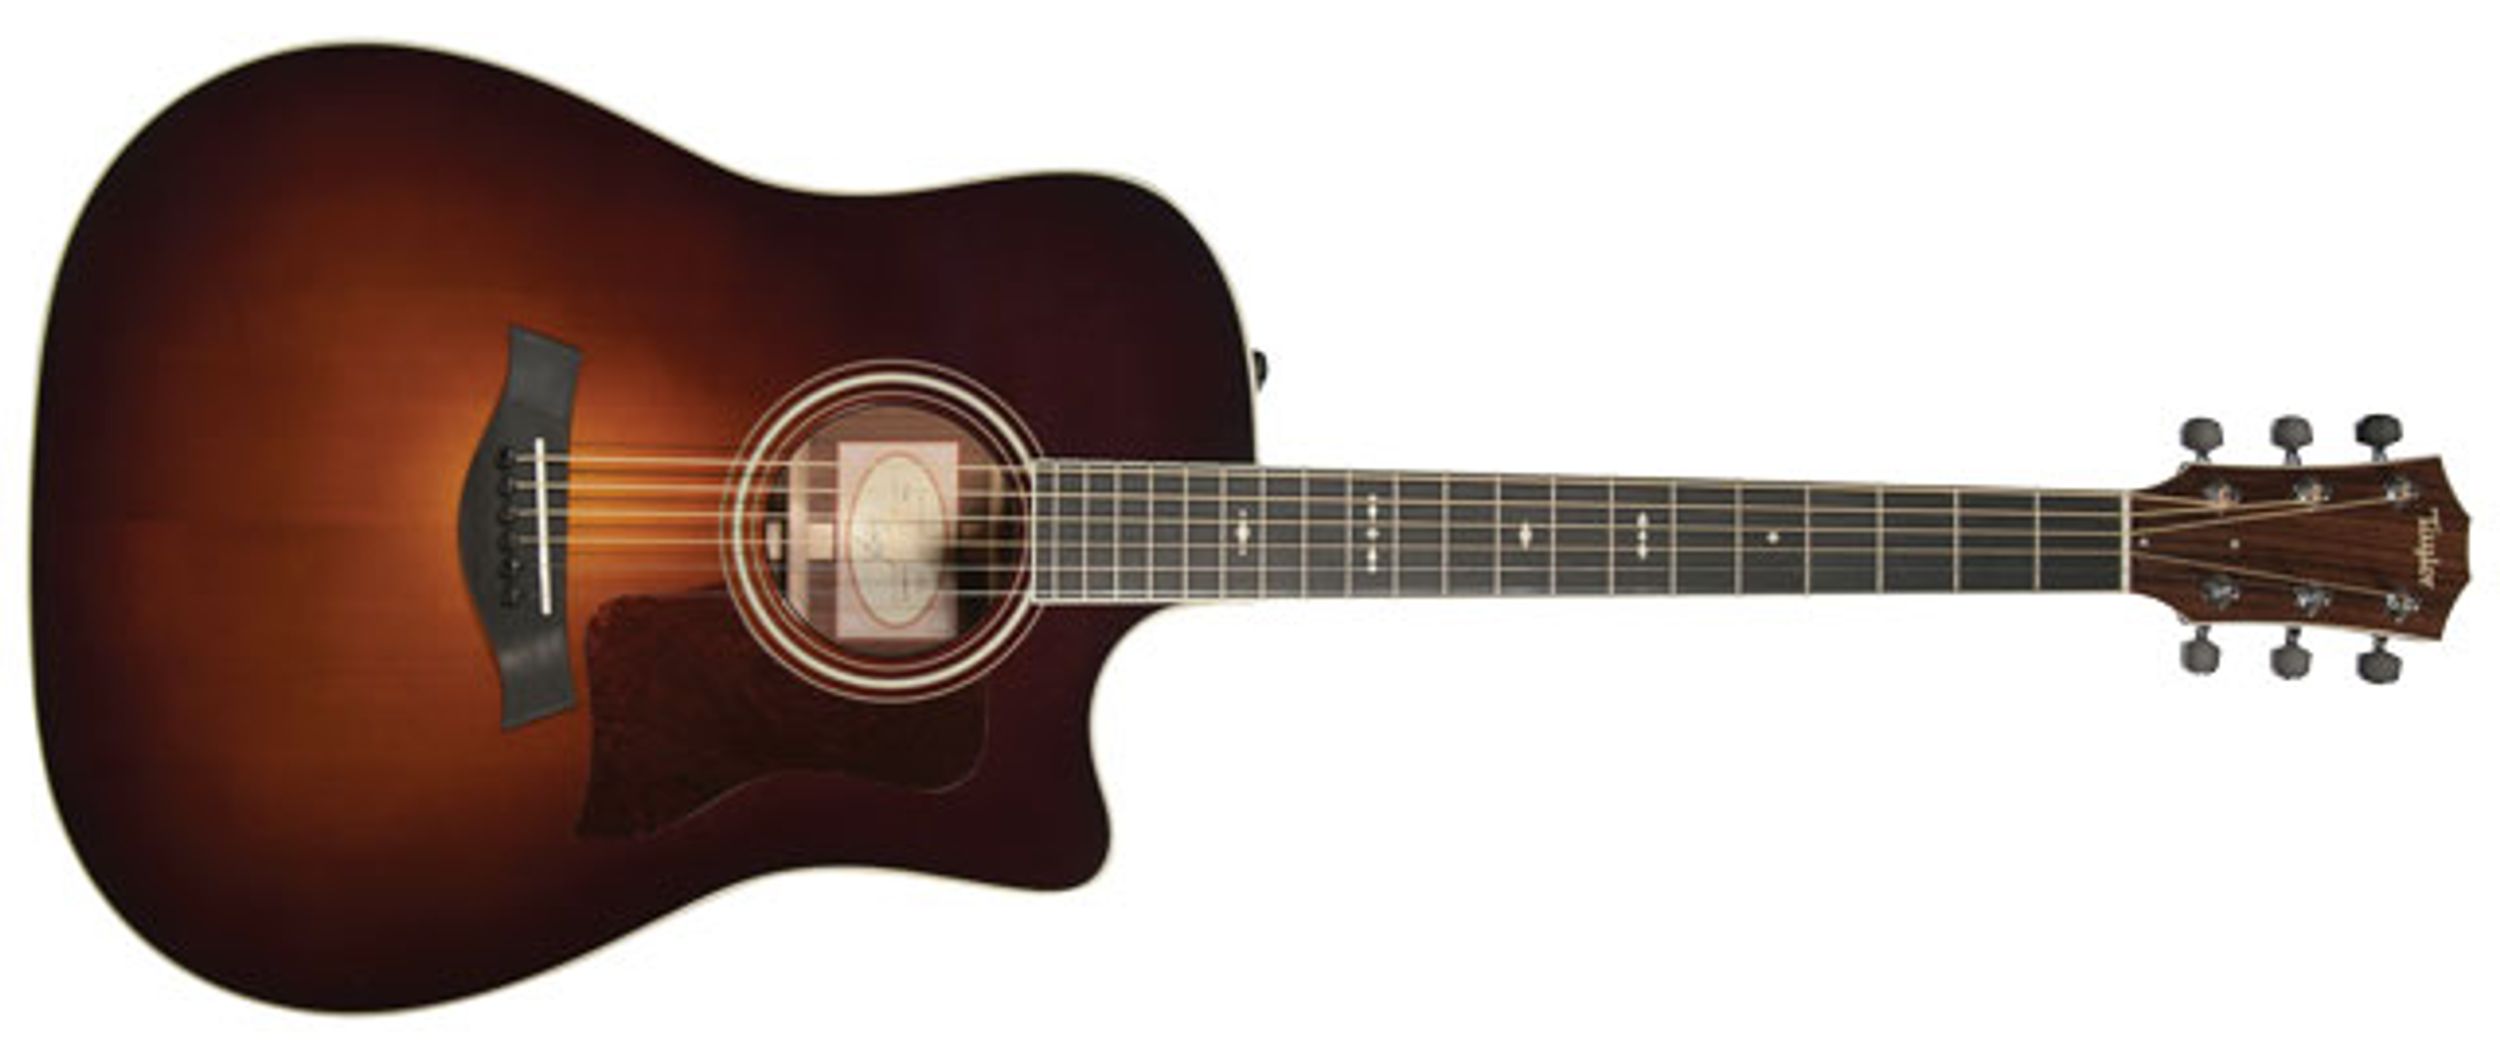 Taylor 710ce Rosewood Acoustic Guitar Review